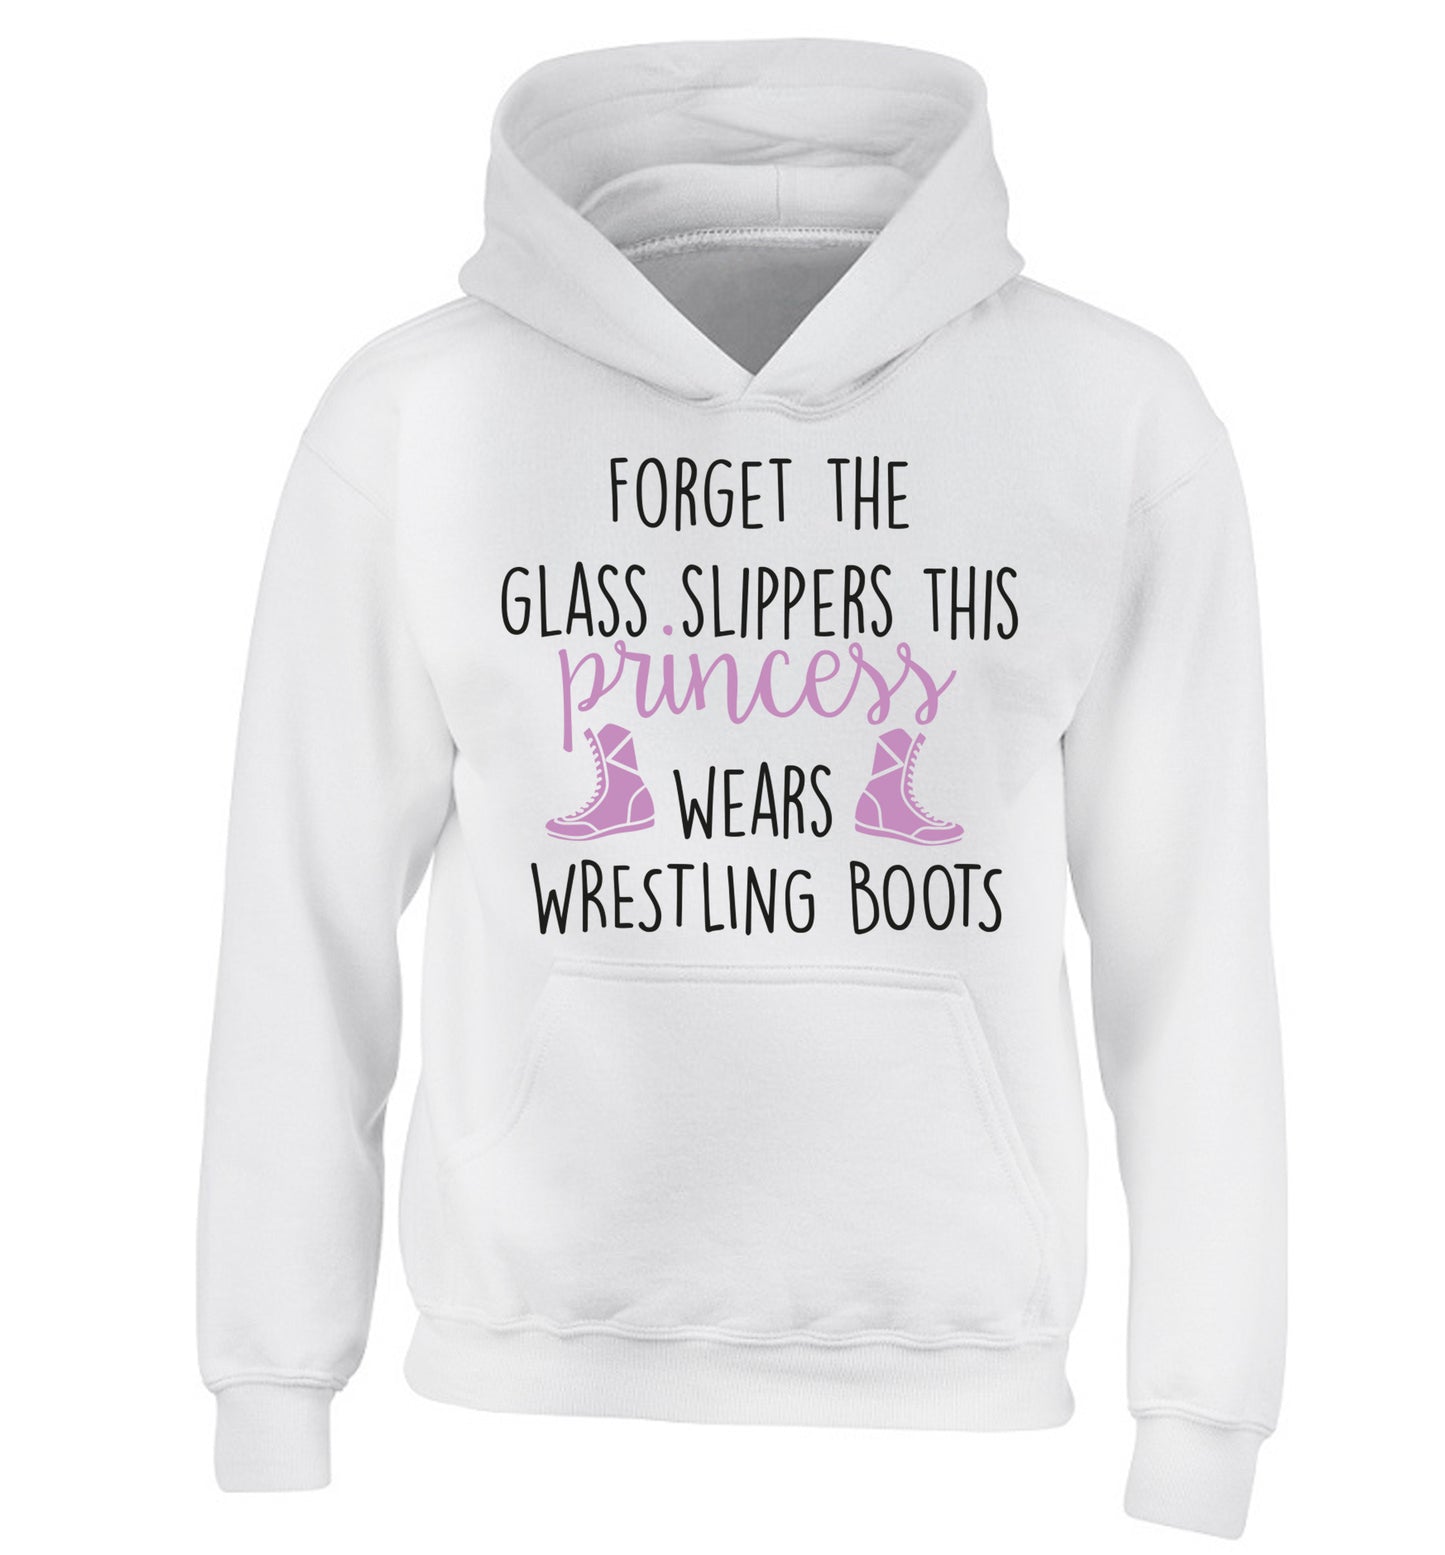 Forget the glass slippers this princess wears wrestling boots children's white hoodie 12-14 Years